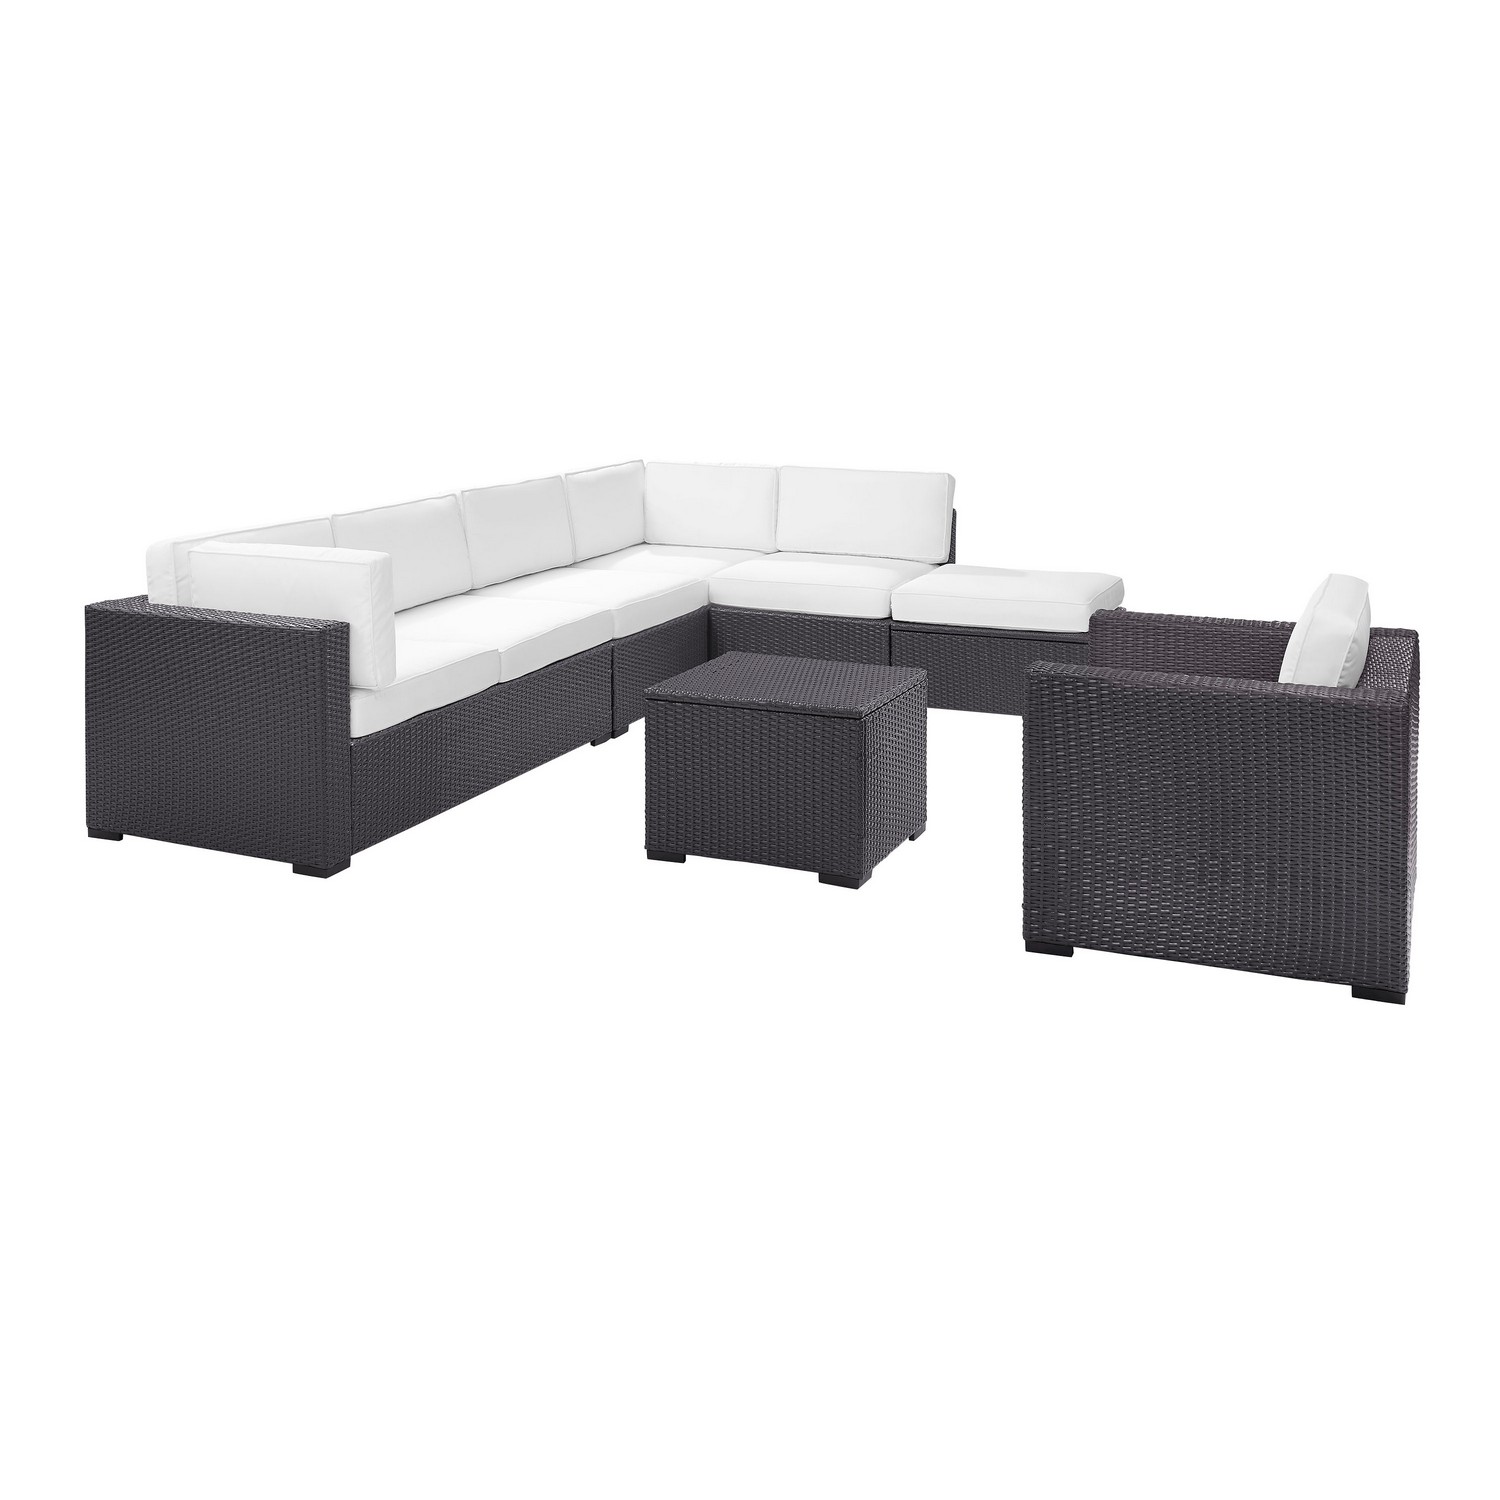 Crosley Biscayne 6-PC Outdoor Wicker Sectional Set - 2 Loveseats, Armless Chair, Arm Chair, Coffee Table, Ottoman - White/Brown